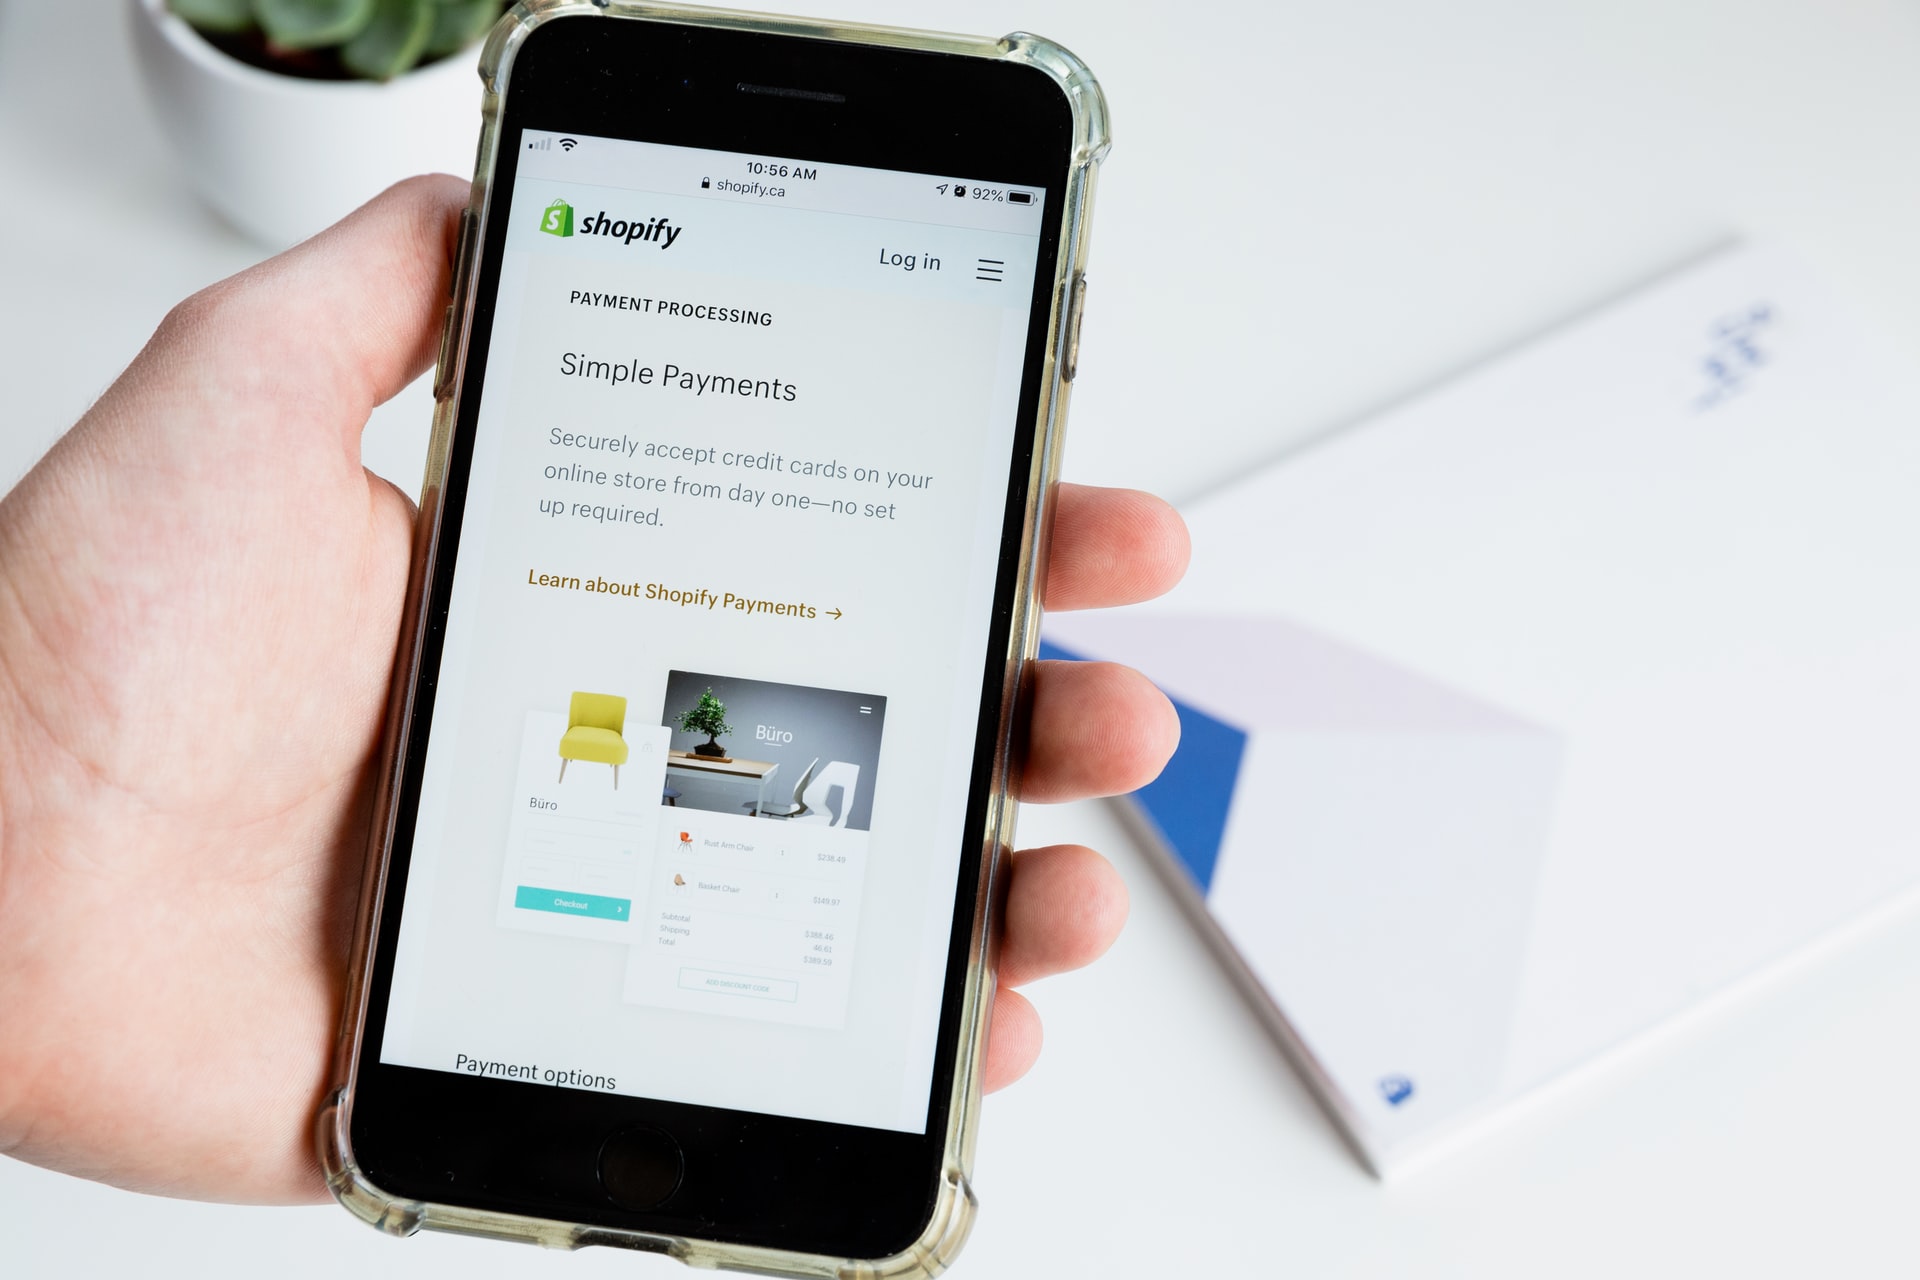 3 Things you can learn from Shopify’s eCommerce website design to improve customer experience